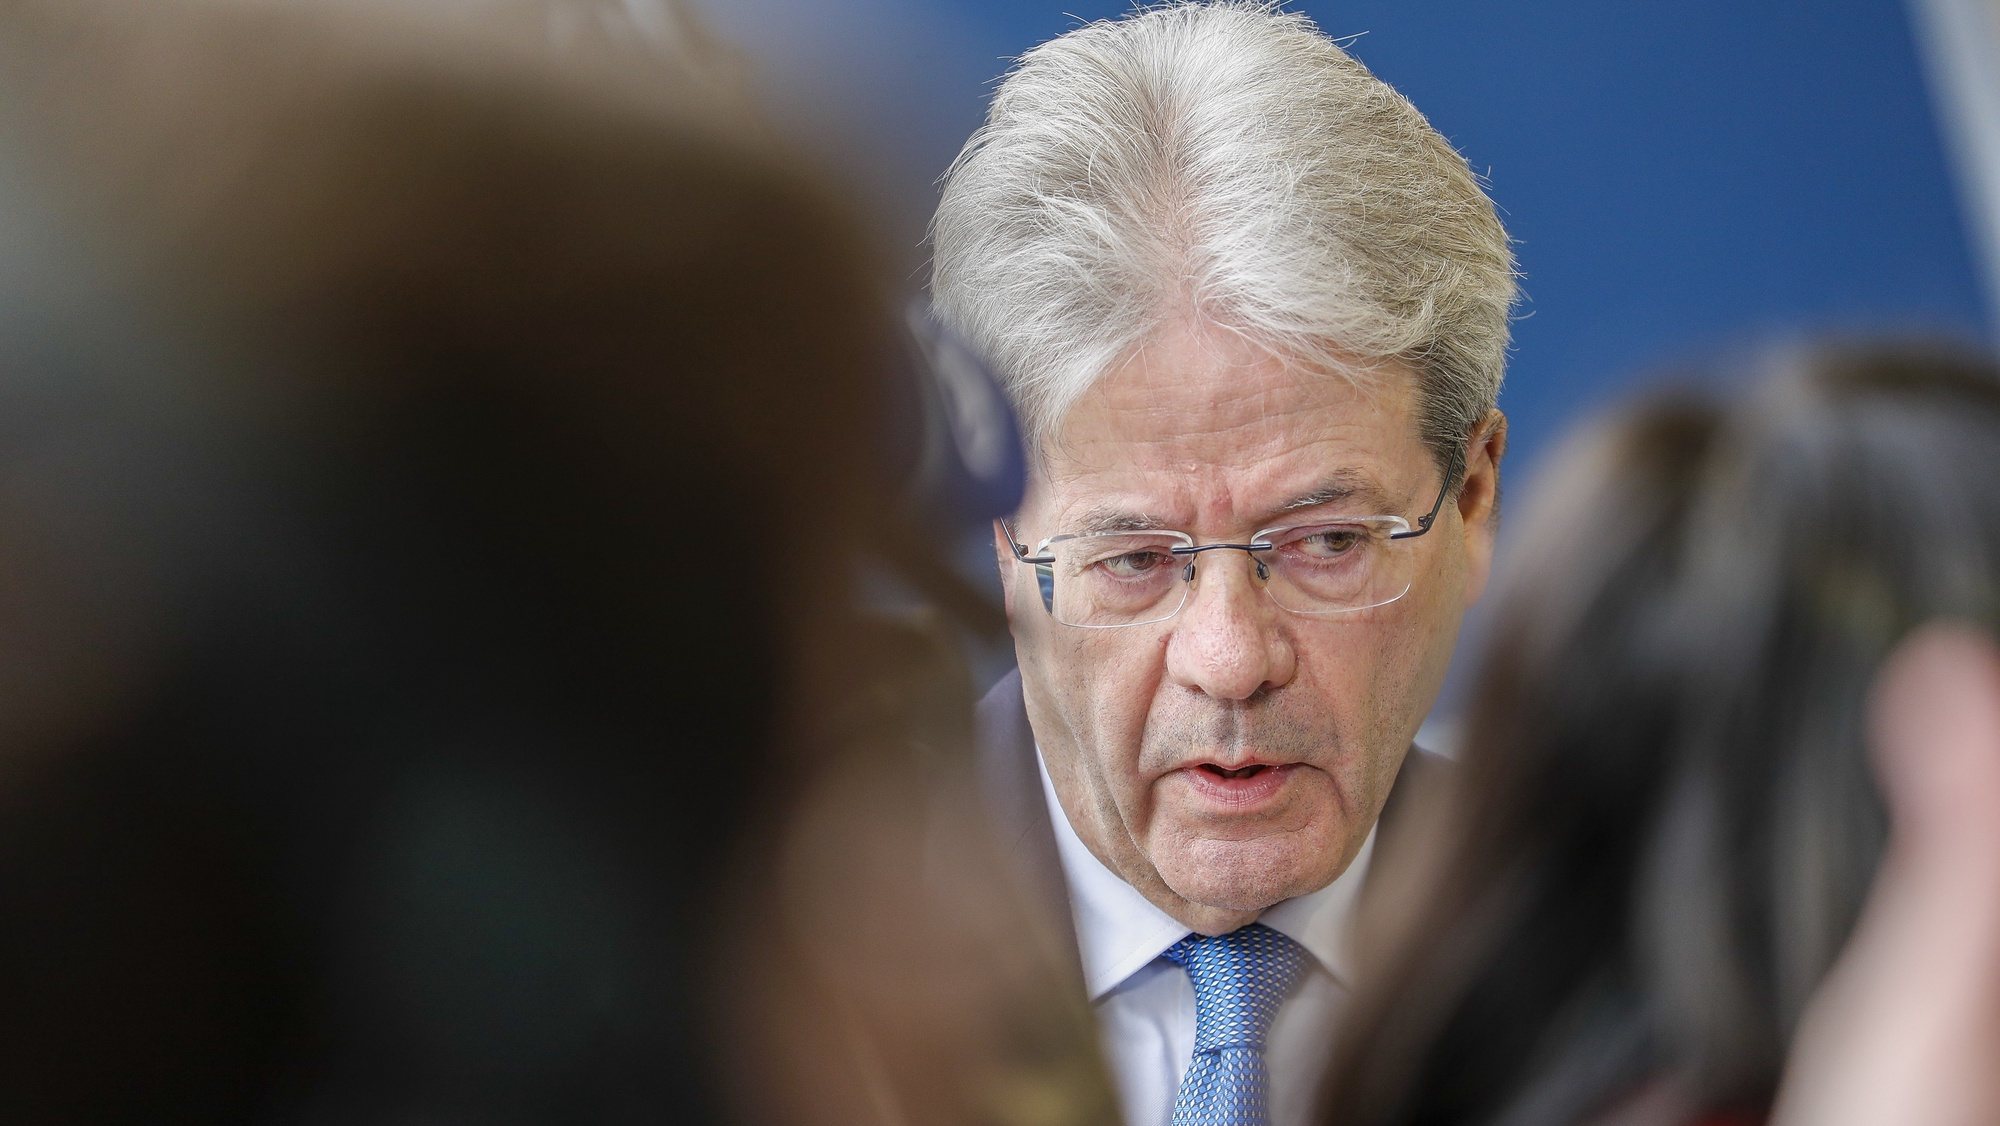 epa09870114 European Commissioners in charge of Economy Paolo Gentiloni speaks to the media as he arrives for the Finance Ministers meeting in Luxembourg, 04 April 2022. Ministers will discuss economic developments resulting from the Russian invasion of Ukraine.  EPA/JULIEN WARNAND